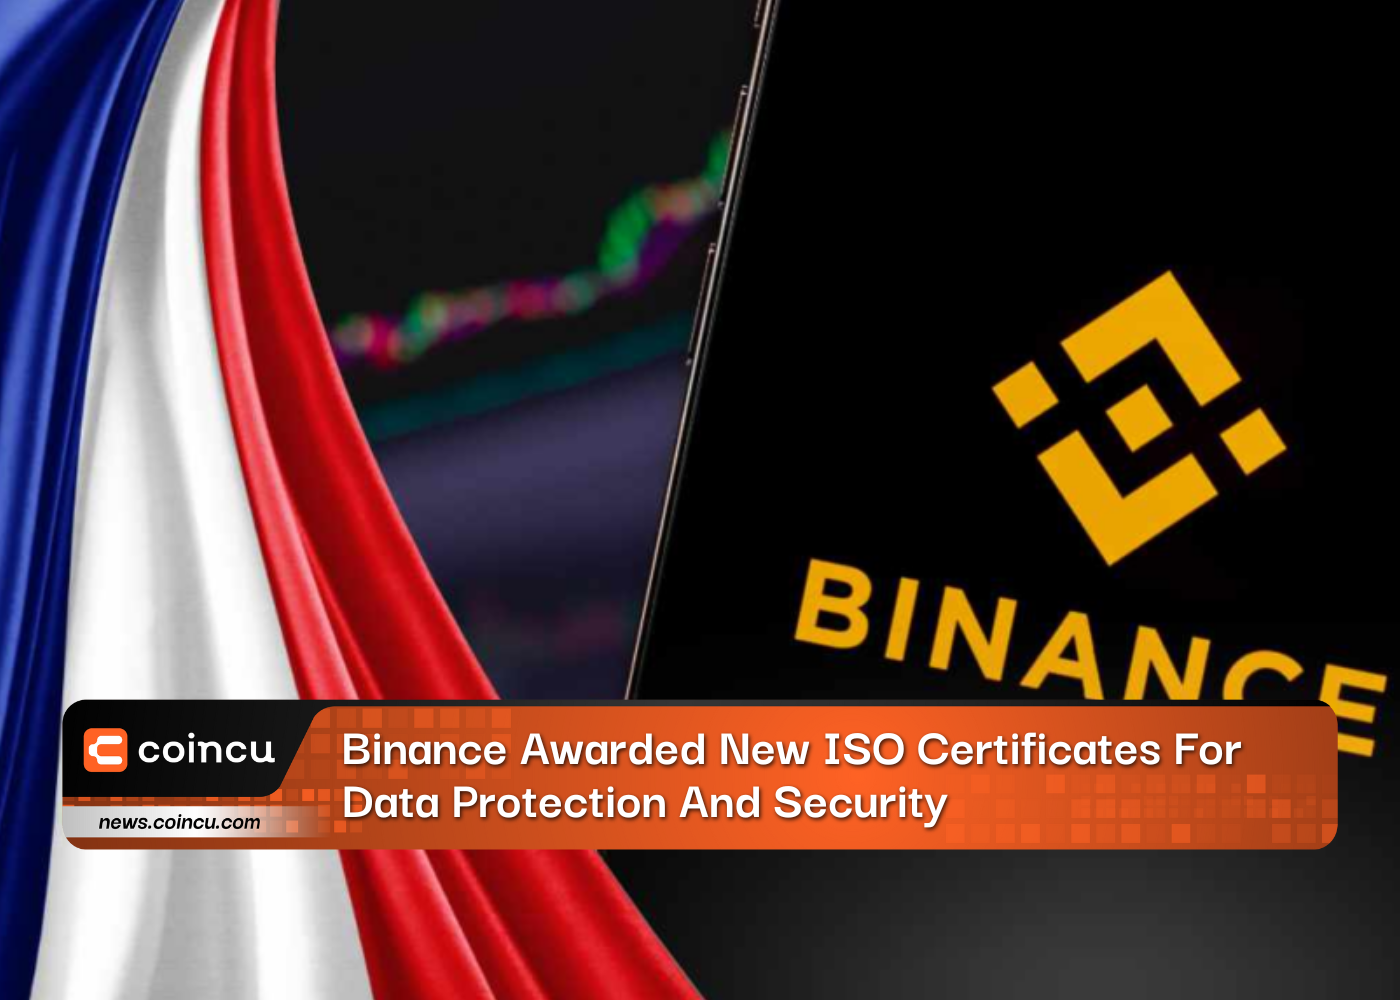 Binance Awarded New ISO Certificates For Data Protection And Security